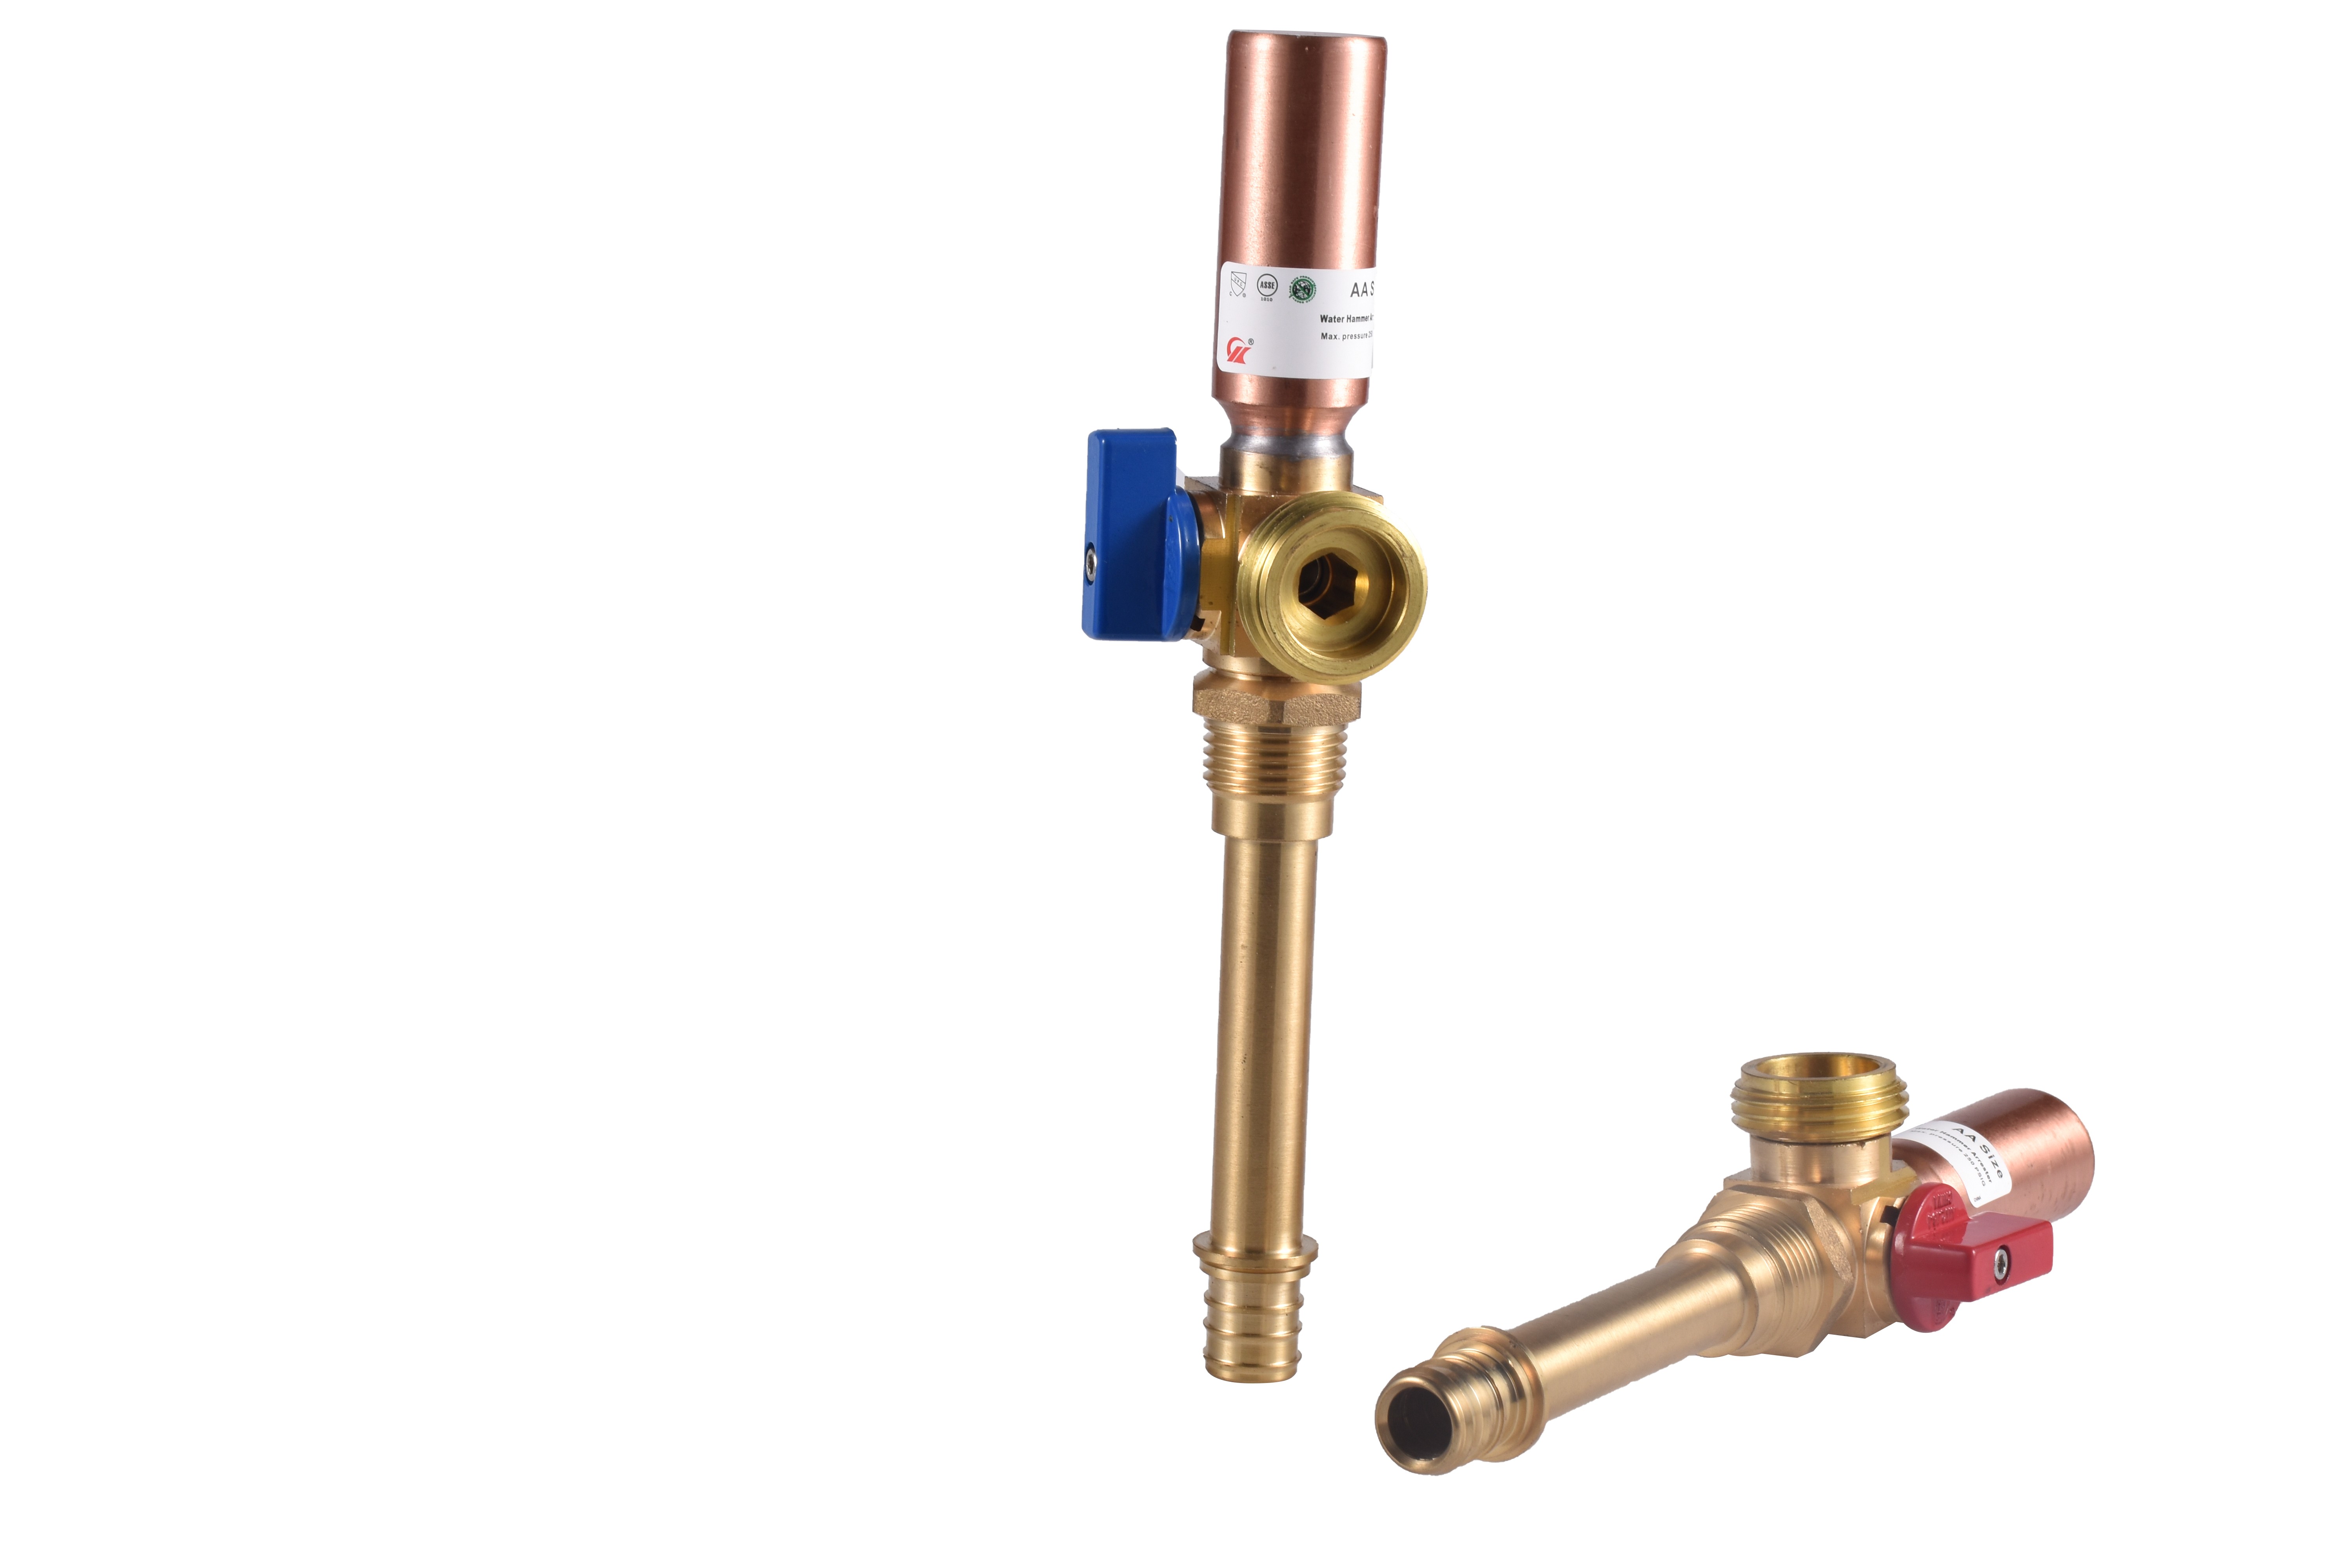 Valve with Copper Water Hammer Arrester 1/2" Rehau Pex F-877 x 3/4" MHT Left Blue and Right Red Handle